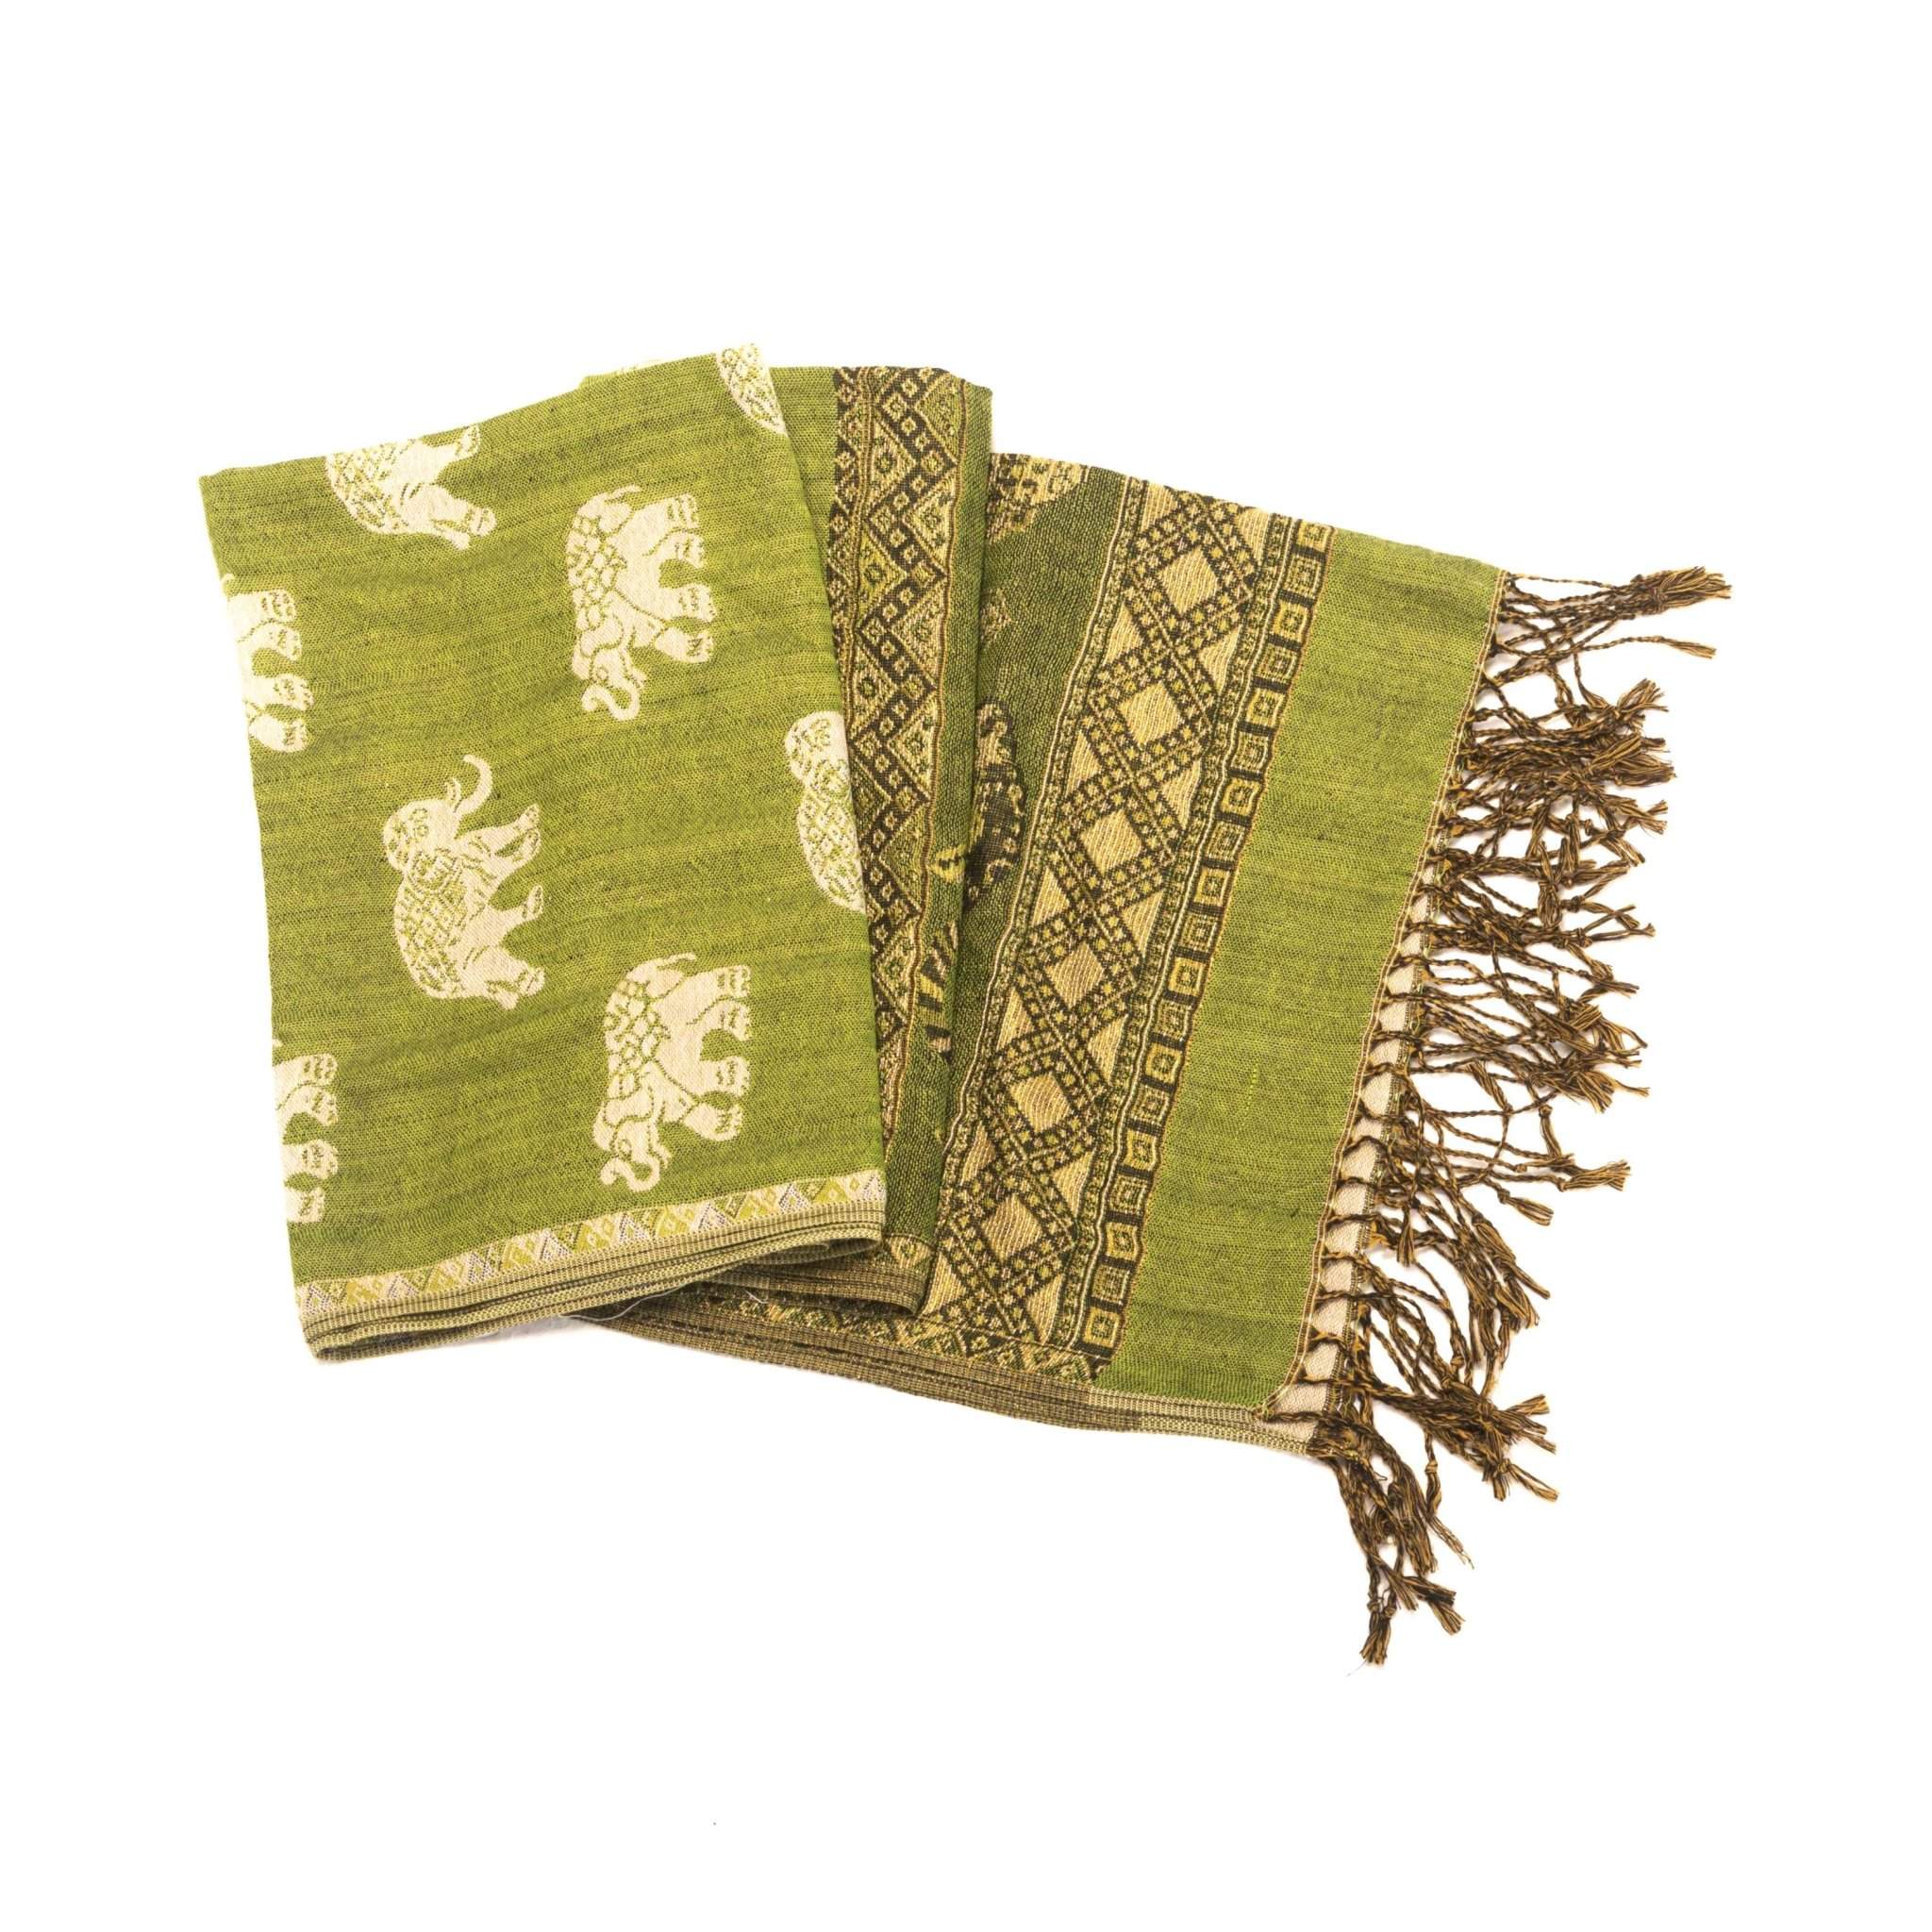 ANGKOR ELEPHANT SCARF Elepanta Scarves - Buy Today Elephant Pants Jewelry And Bohemian Clothes Handmade In Thailand Help To Save The Elephants FairTrade And Vegan